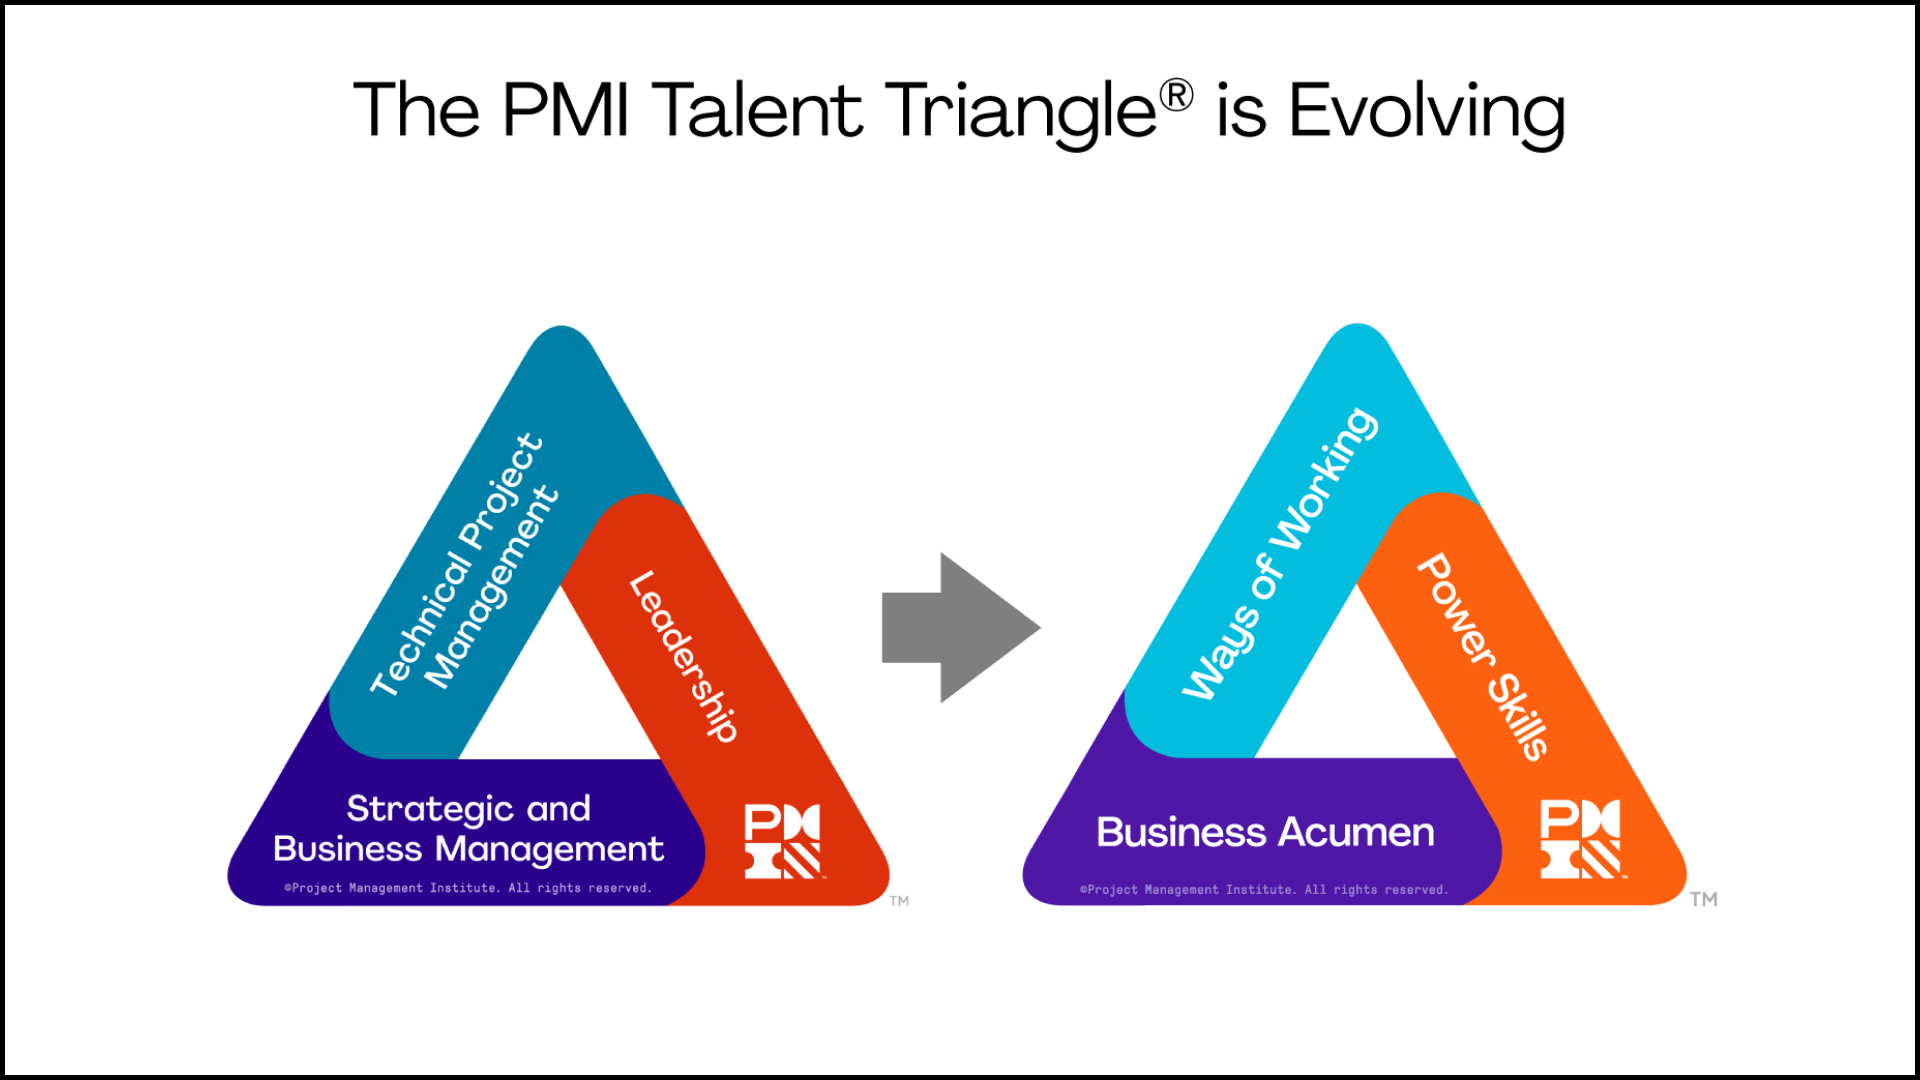 evolution of project management skills represented in graphical triangle created by PMI